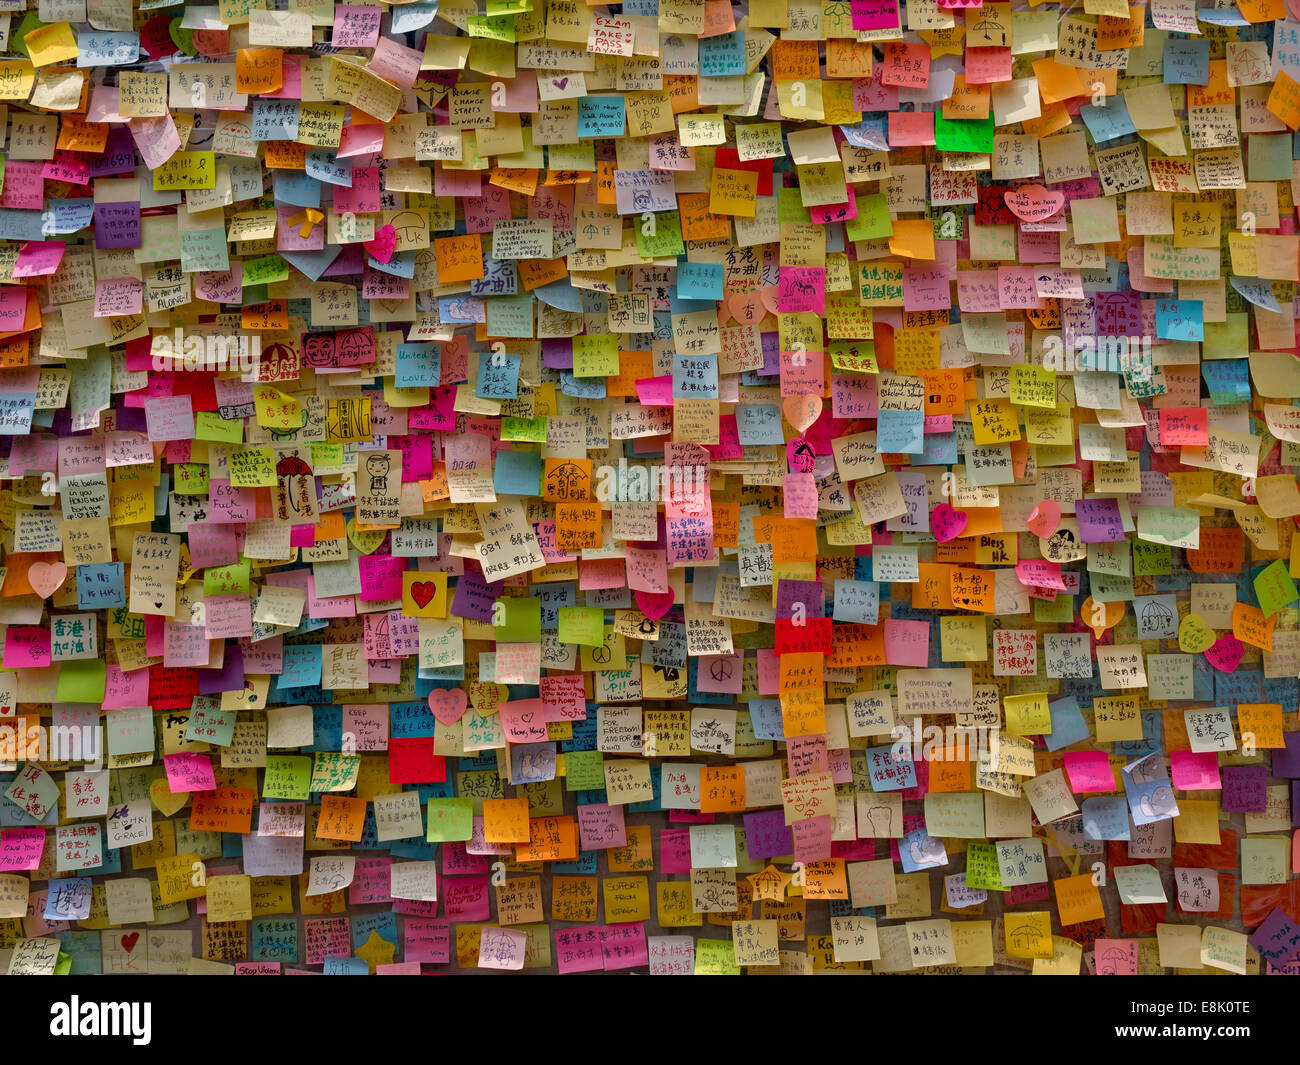 Hong Kong, China. 9th October, 2014. Messages of support for the pro-democracy protests are posted on the walls of the Tamar  government building. The wallhas become known as 'Lennon Wall' and now contains thousands of messages of support for the pro democracy protesters. Stock Photo